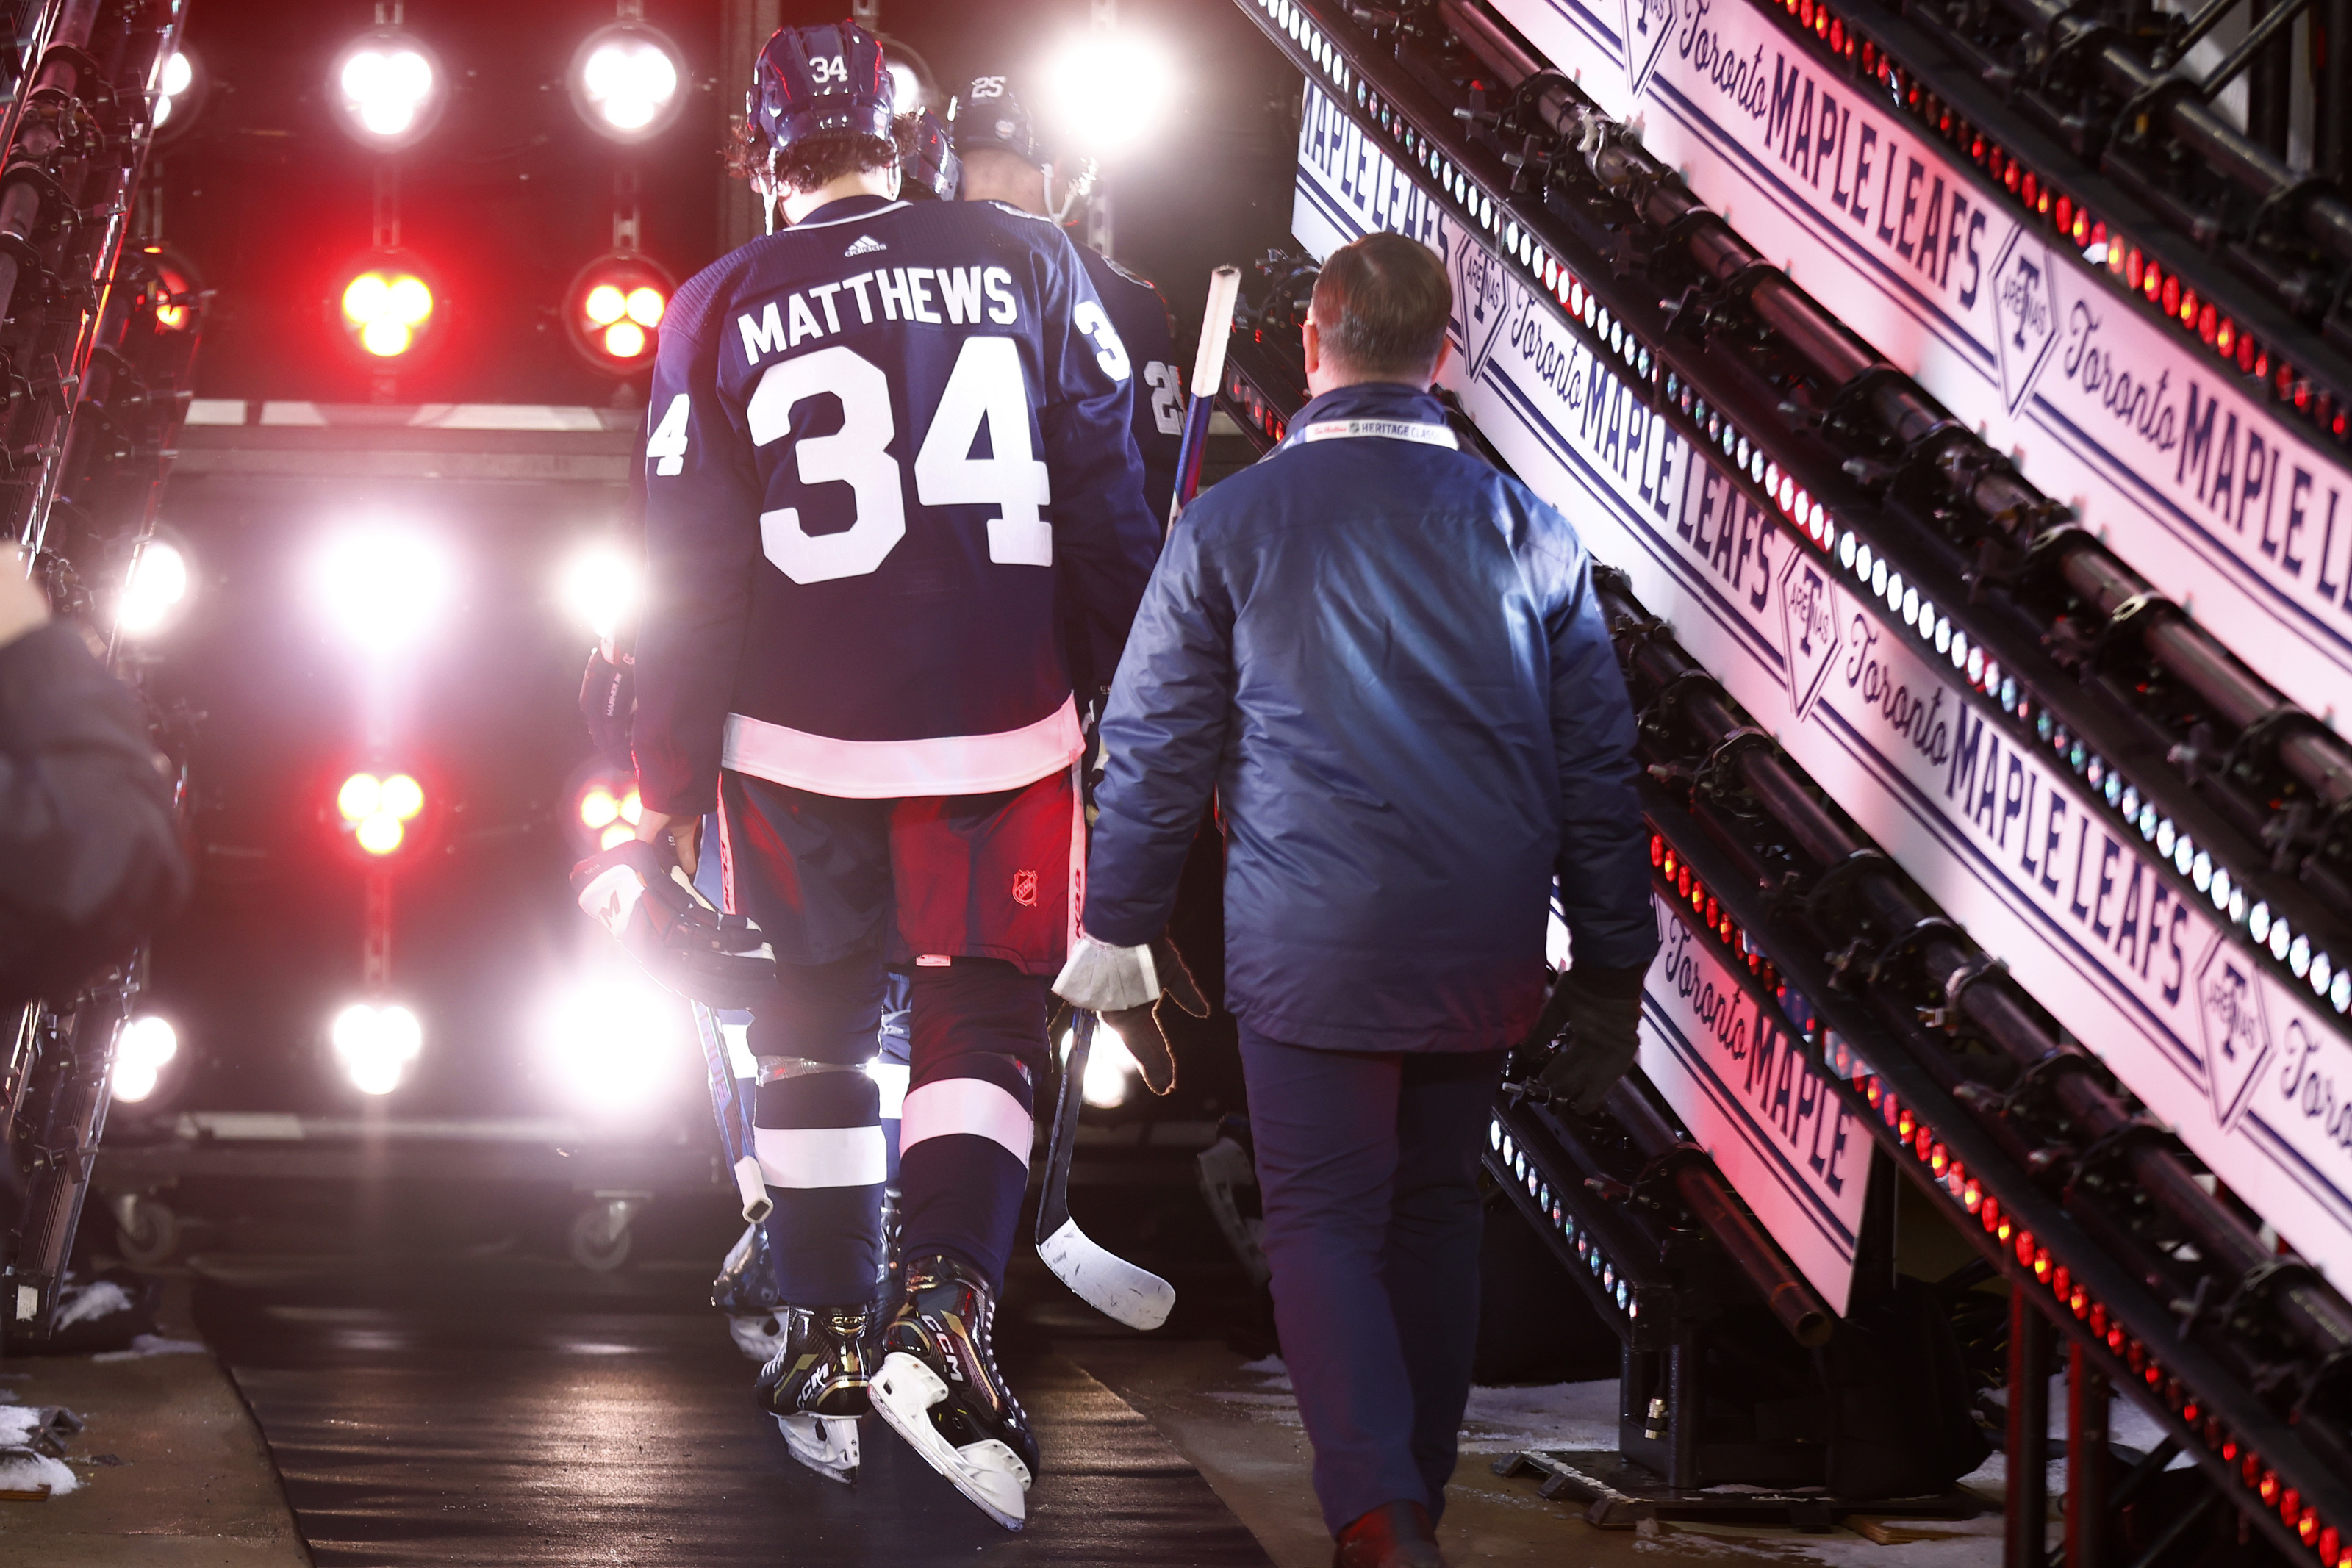 Auston Matthews suspended 2 games for cross-check in Heritage